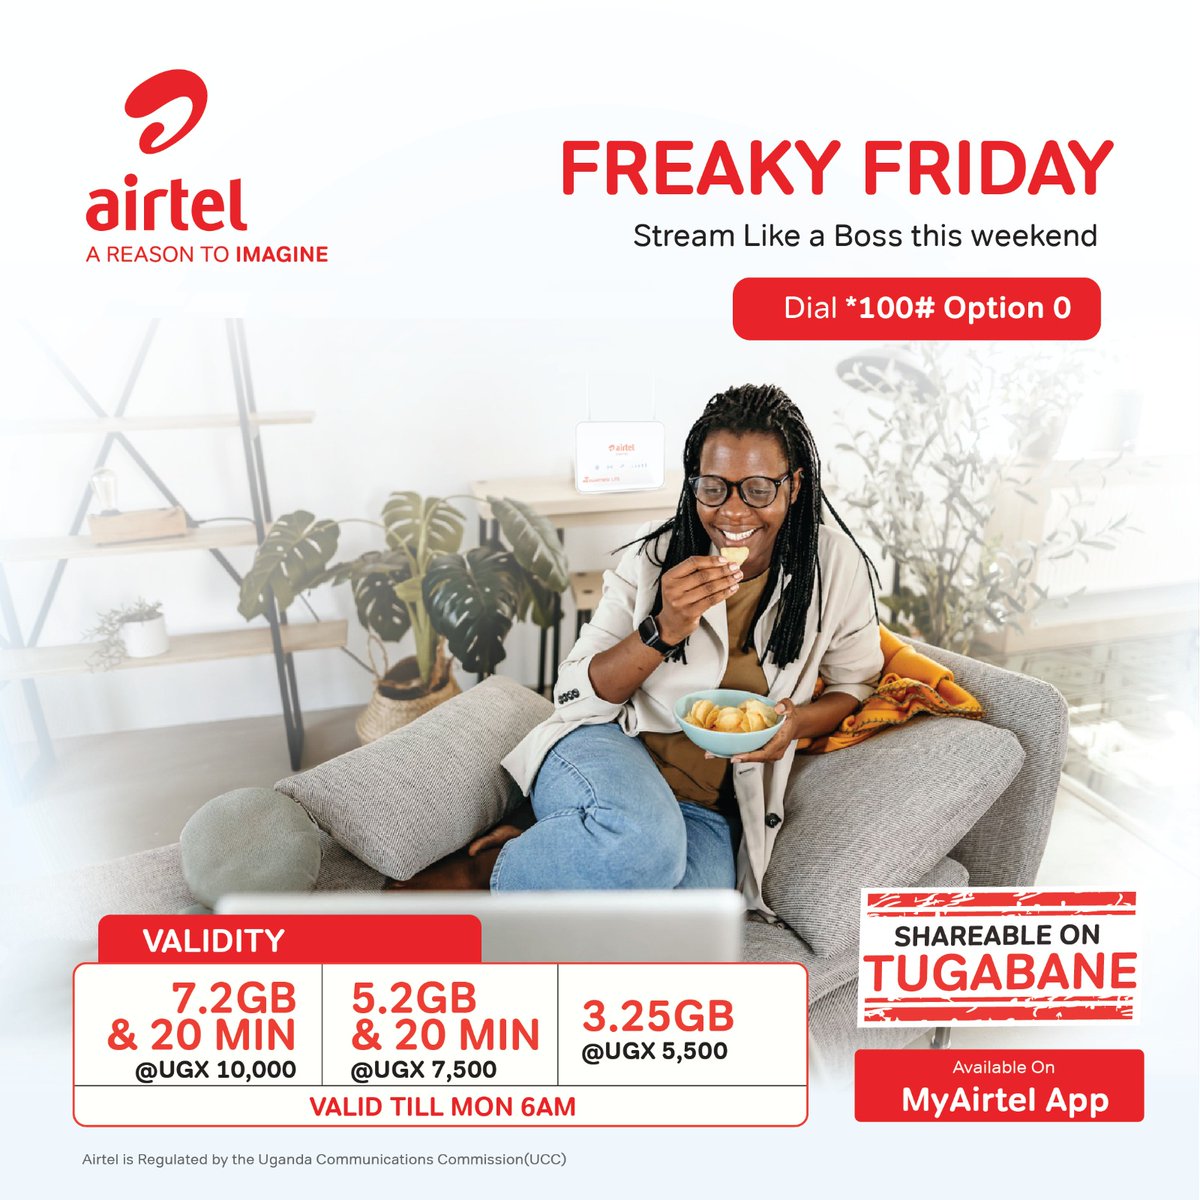 Unlock exclusive #FreakyFriday deals with Airtel! 🎉 Dial *100#, select option 0 or use the #MyAirtelApp to access special offers. Make your Friday fabulous with Airtel. Don't miss out! airtelafrica.onelink.me/cGyr/qgj4qeu2